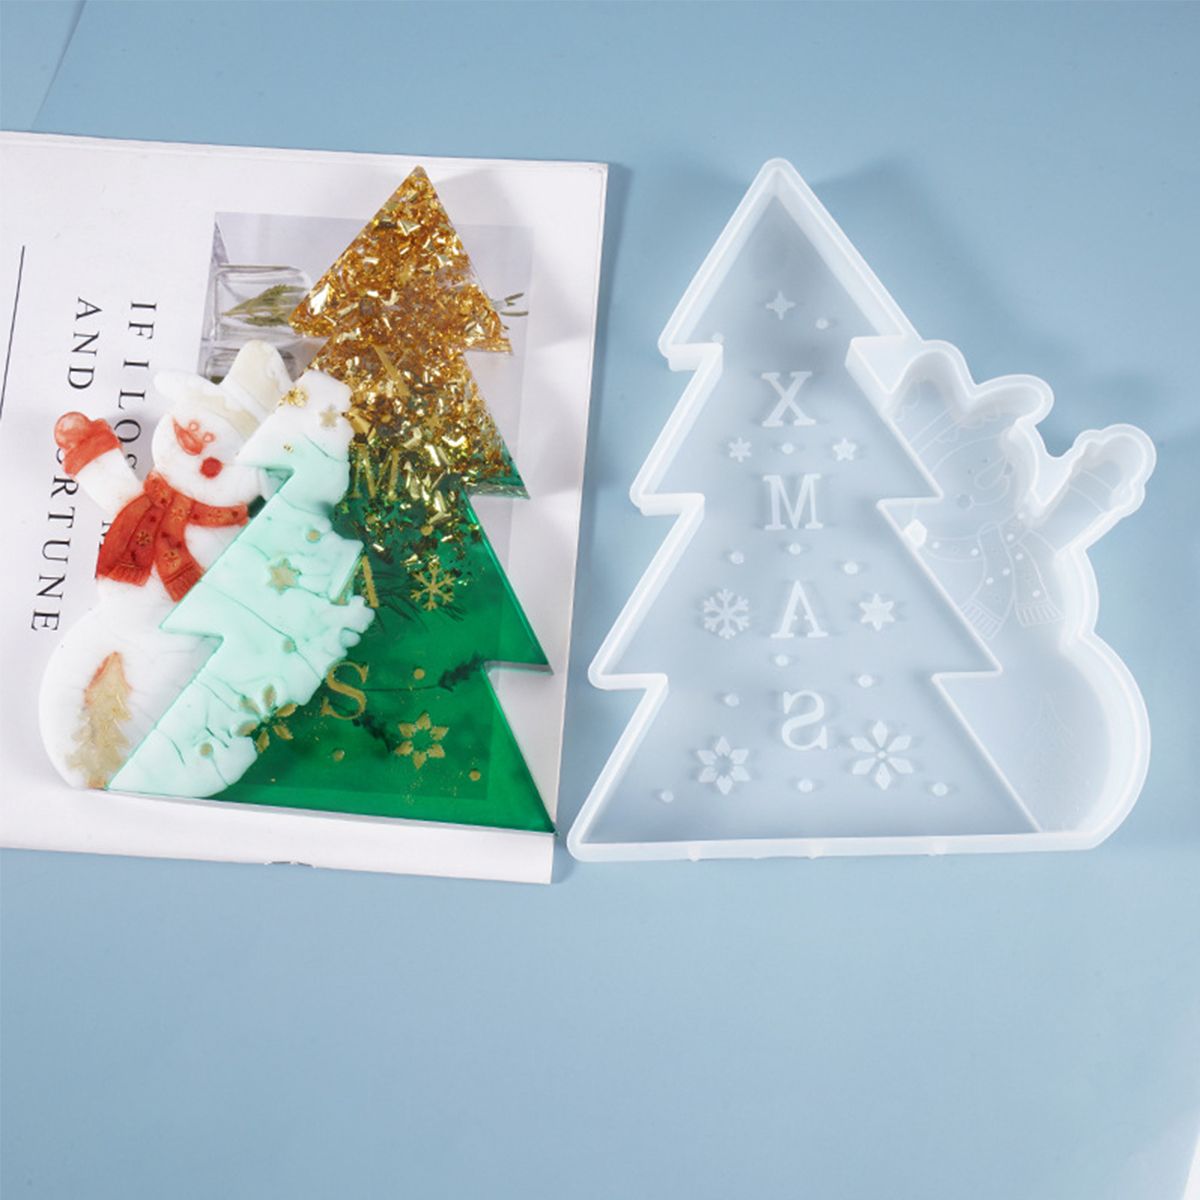 Christmas-Wish-Silicone-Jewelry-Casting-Mold-Resin-Epoxy-Mould-Craft-Decoration-Xmas-1768285